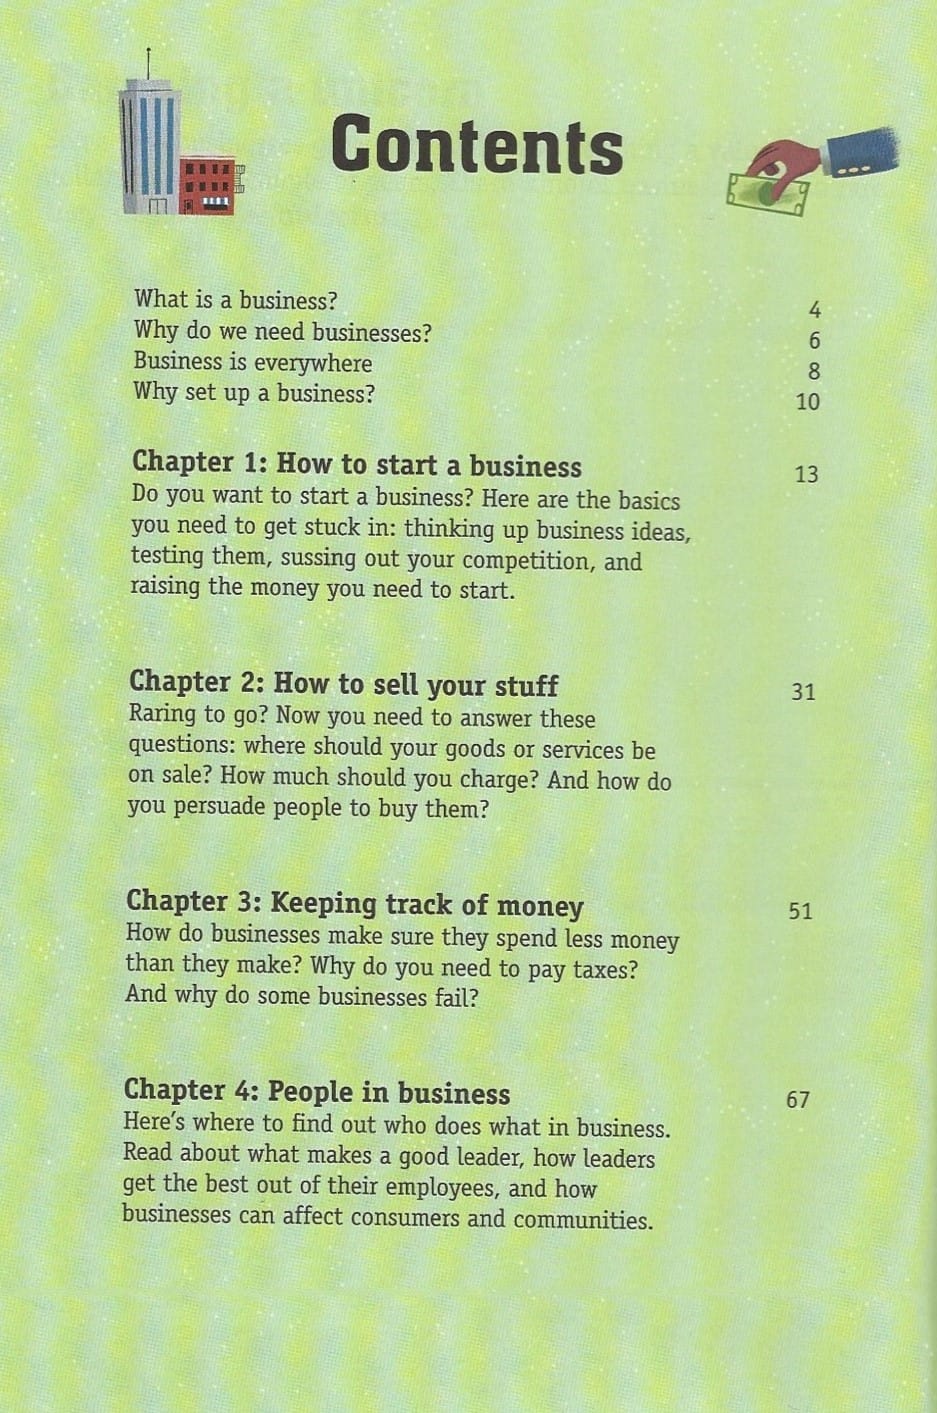 Business for Beginners (Hardback)-Contents Page 1